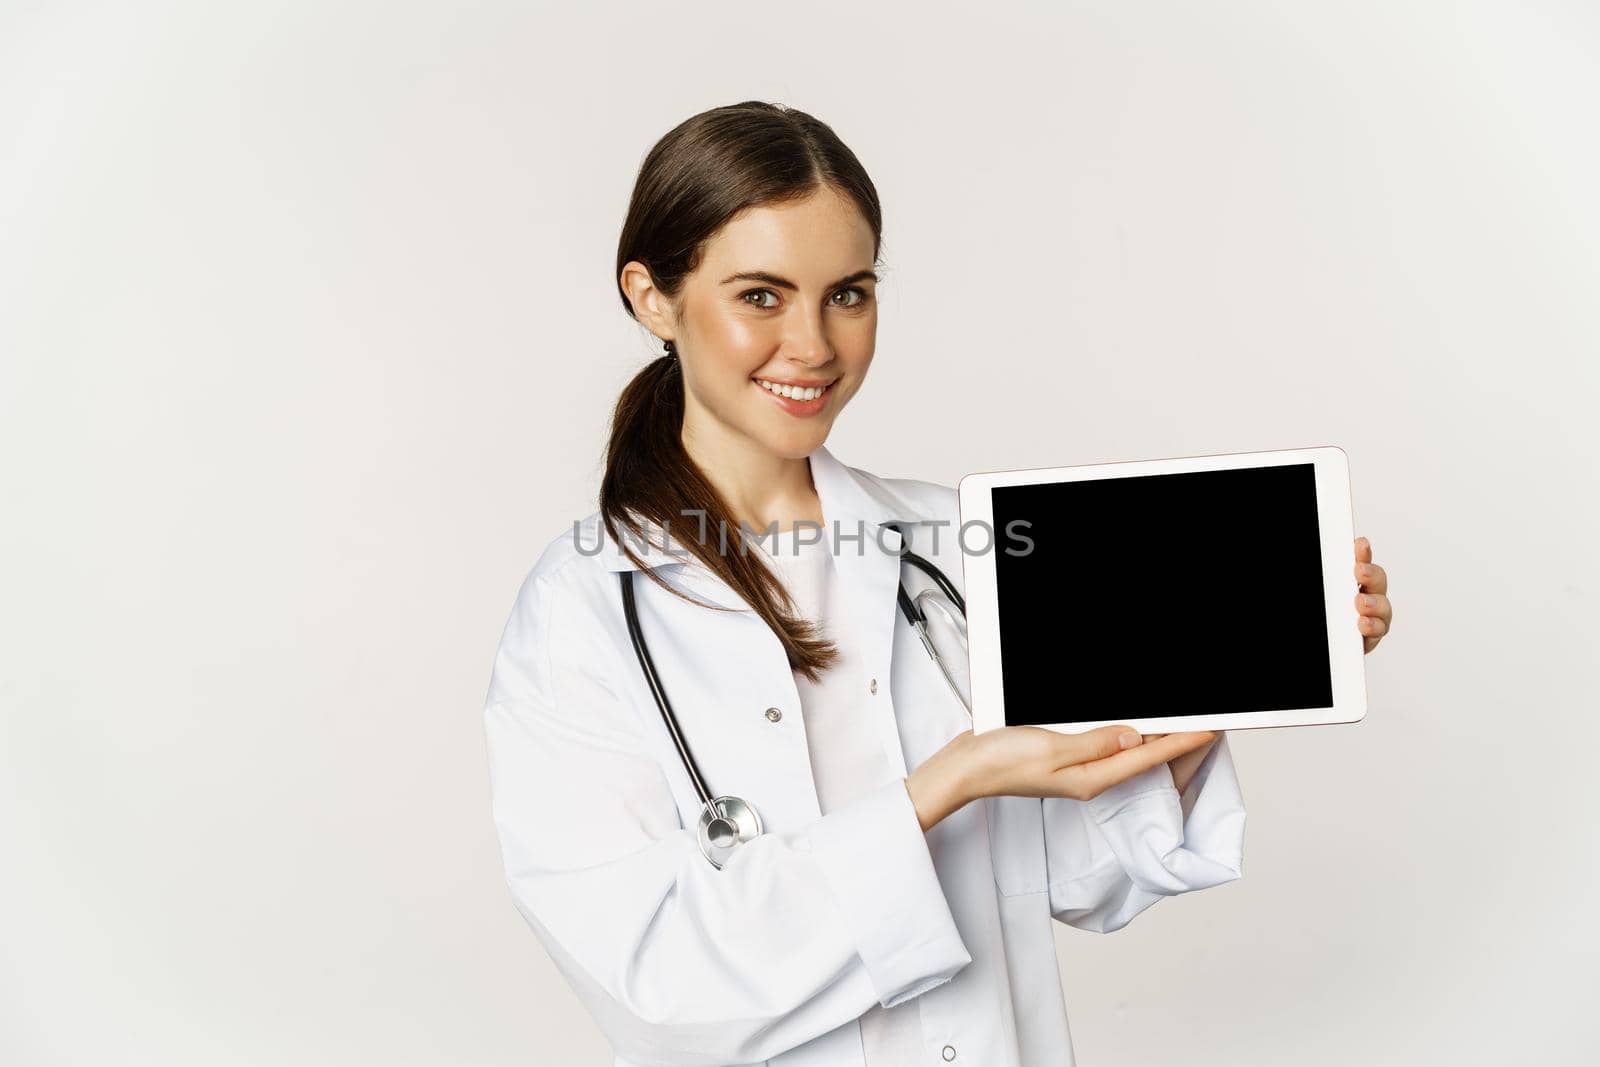 Image of woman doctor, female healthcare worker showing online medical website, digital tablet screen and smiling, standing in white coat over white background.